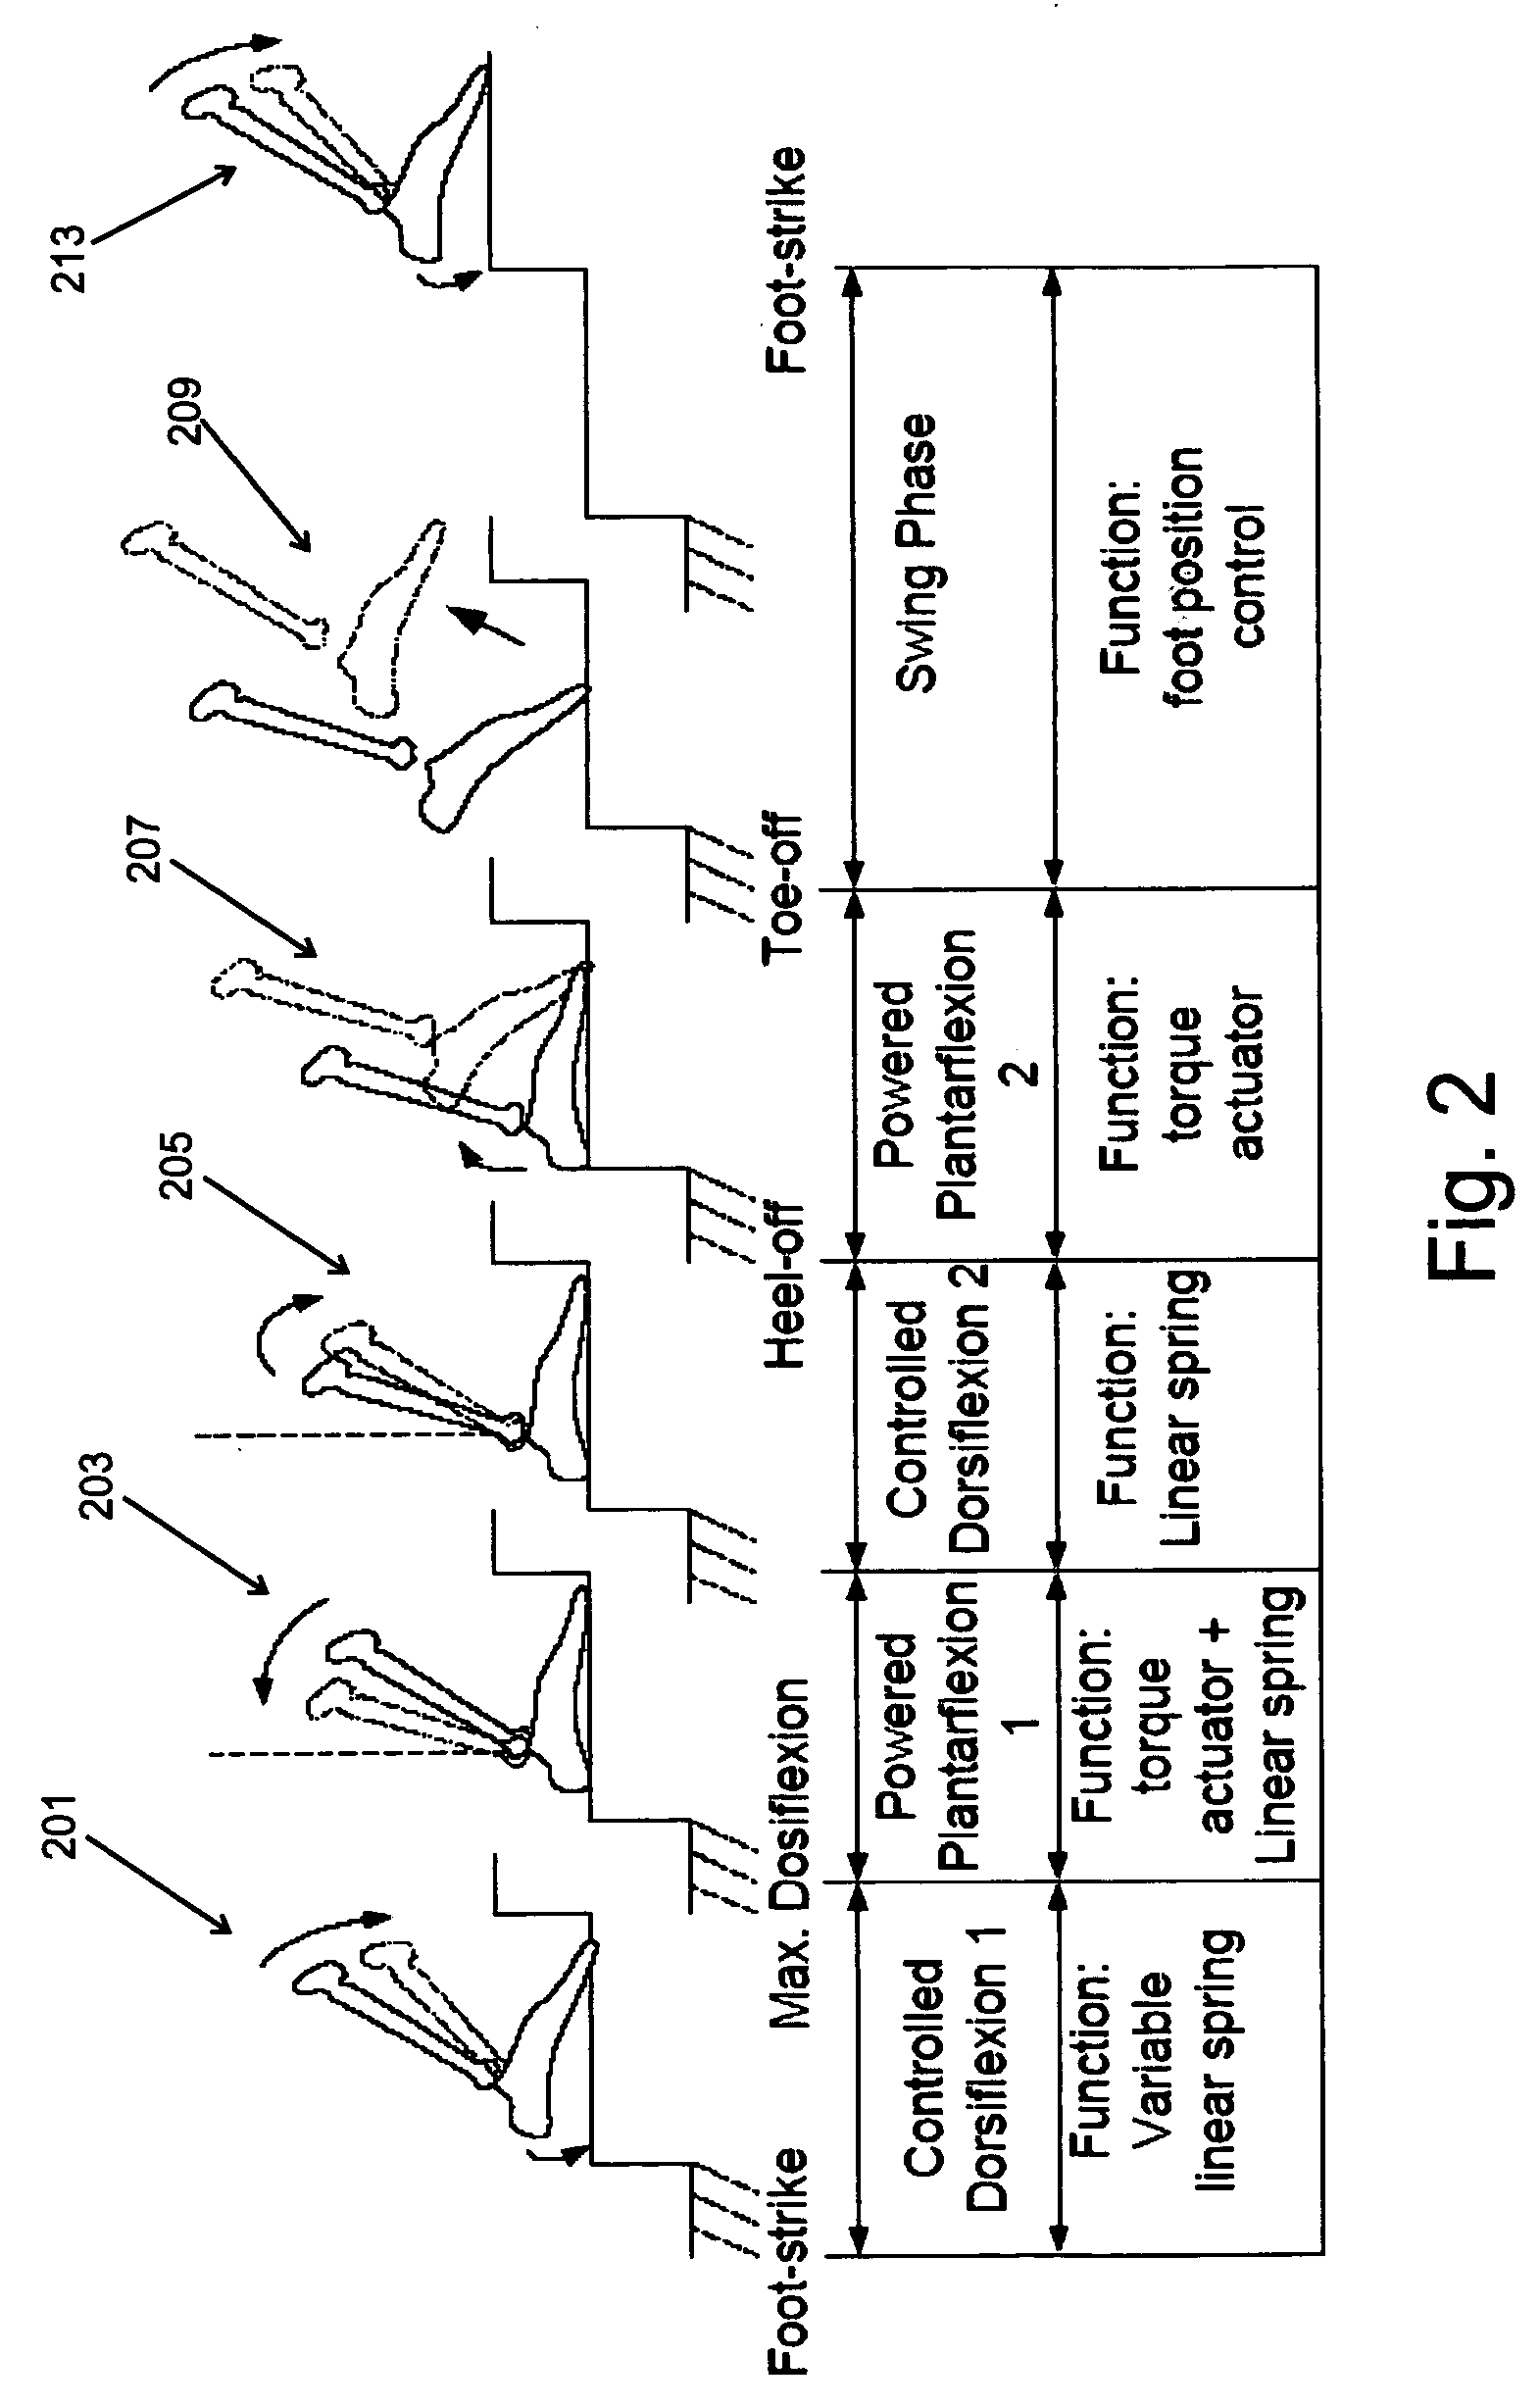 Artificial human limbs and joints employing actuators, springs, and variable-damper elements